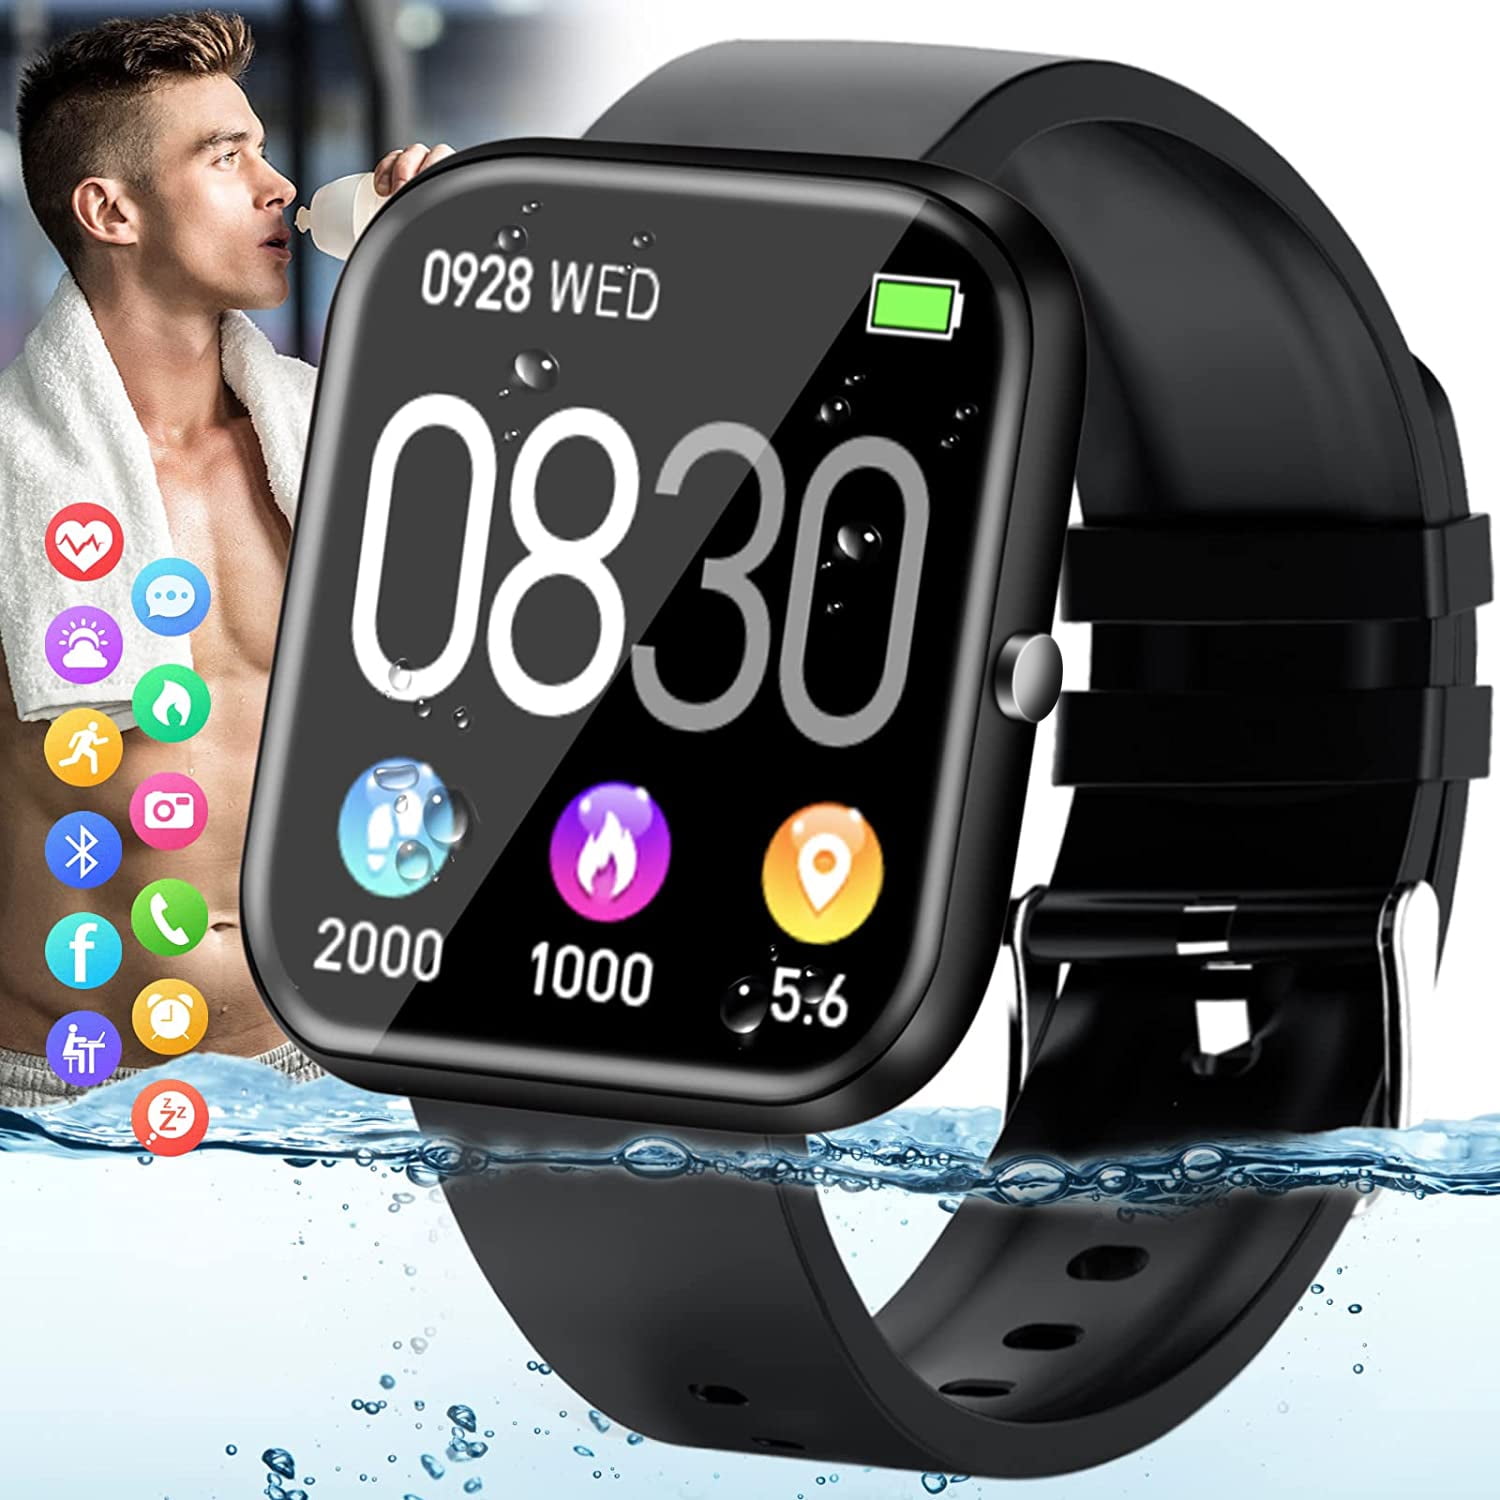 Full Touch Screen Smartwatch Activity Tracker with Heart Rate and Sleep Monitor Smart Watches Fitness Watch Waterproof IP68 Fitness Tracker Pedometer Calorie Counter for Men Women Android iOS 